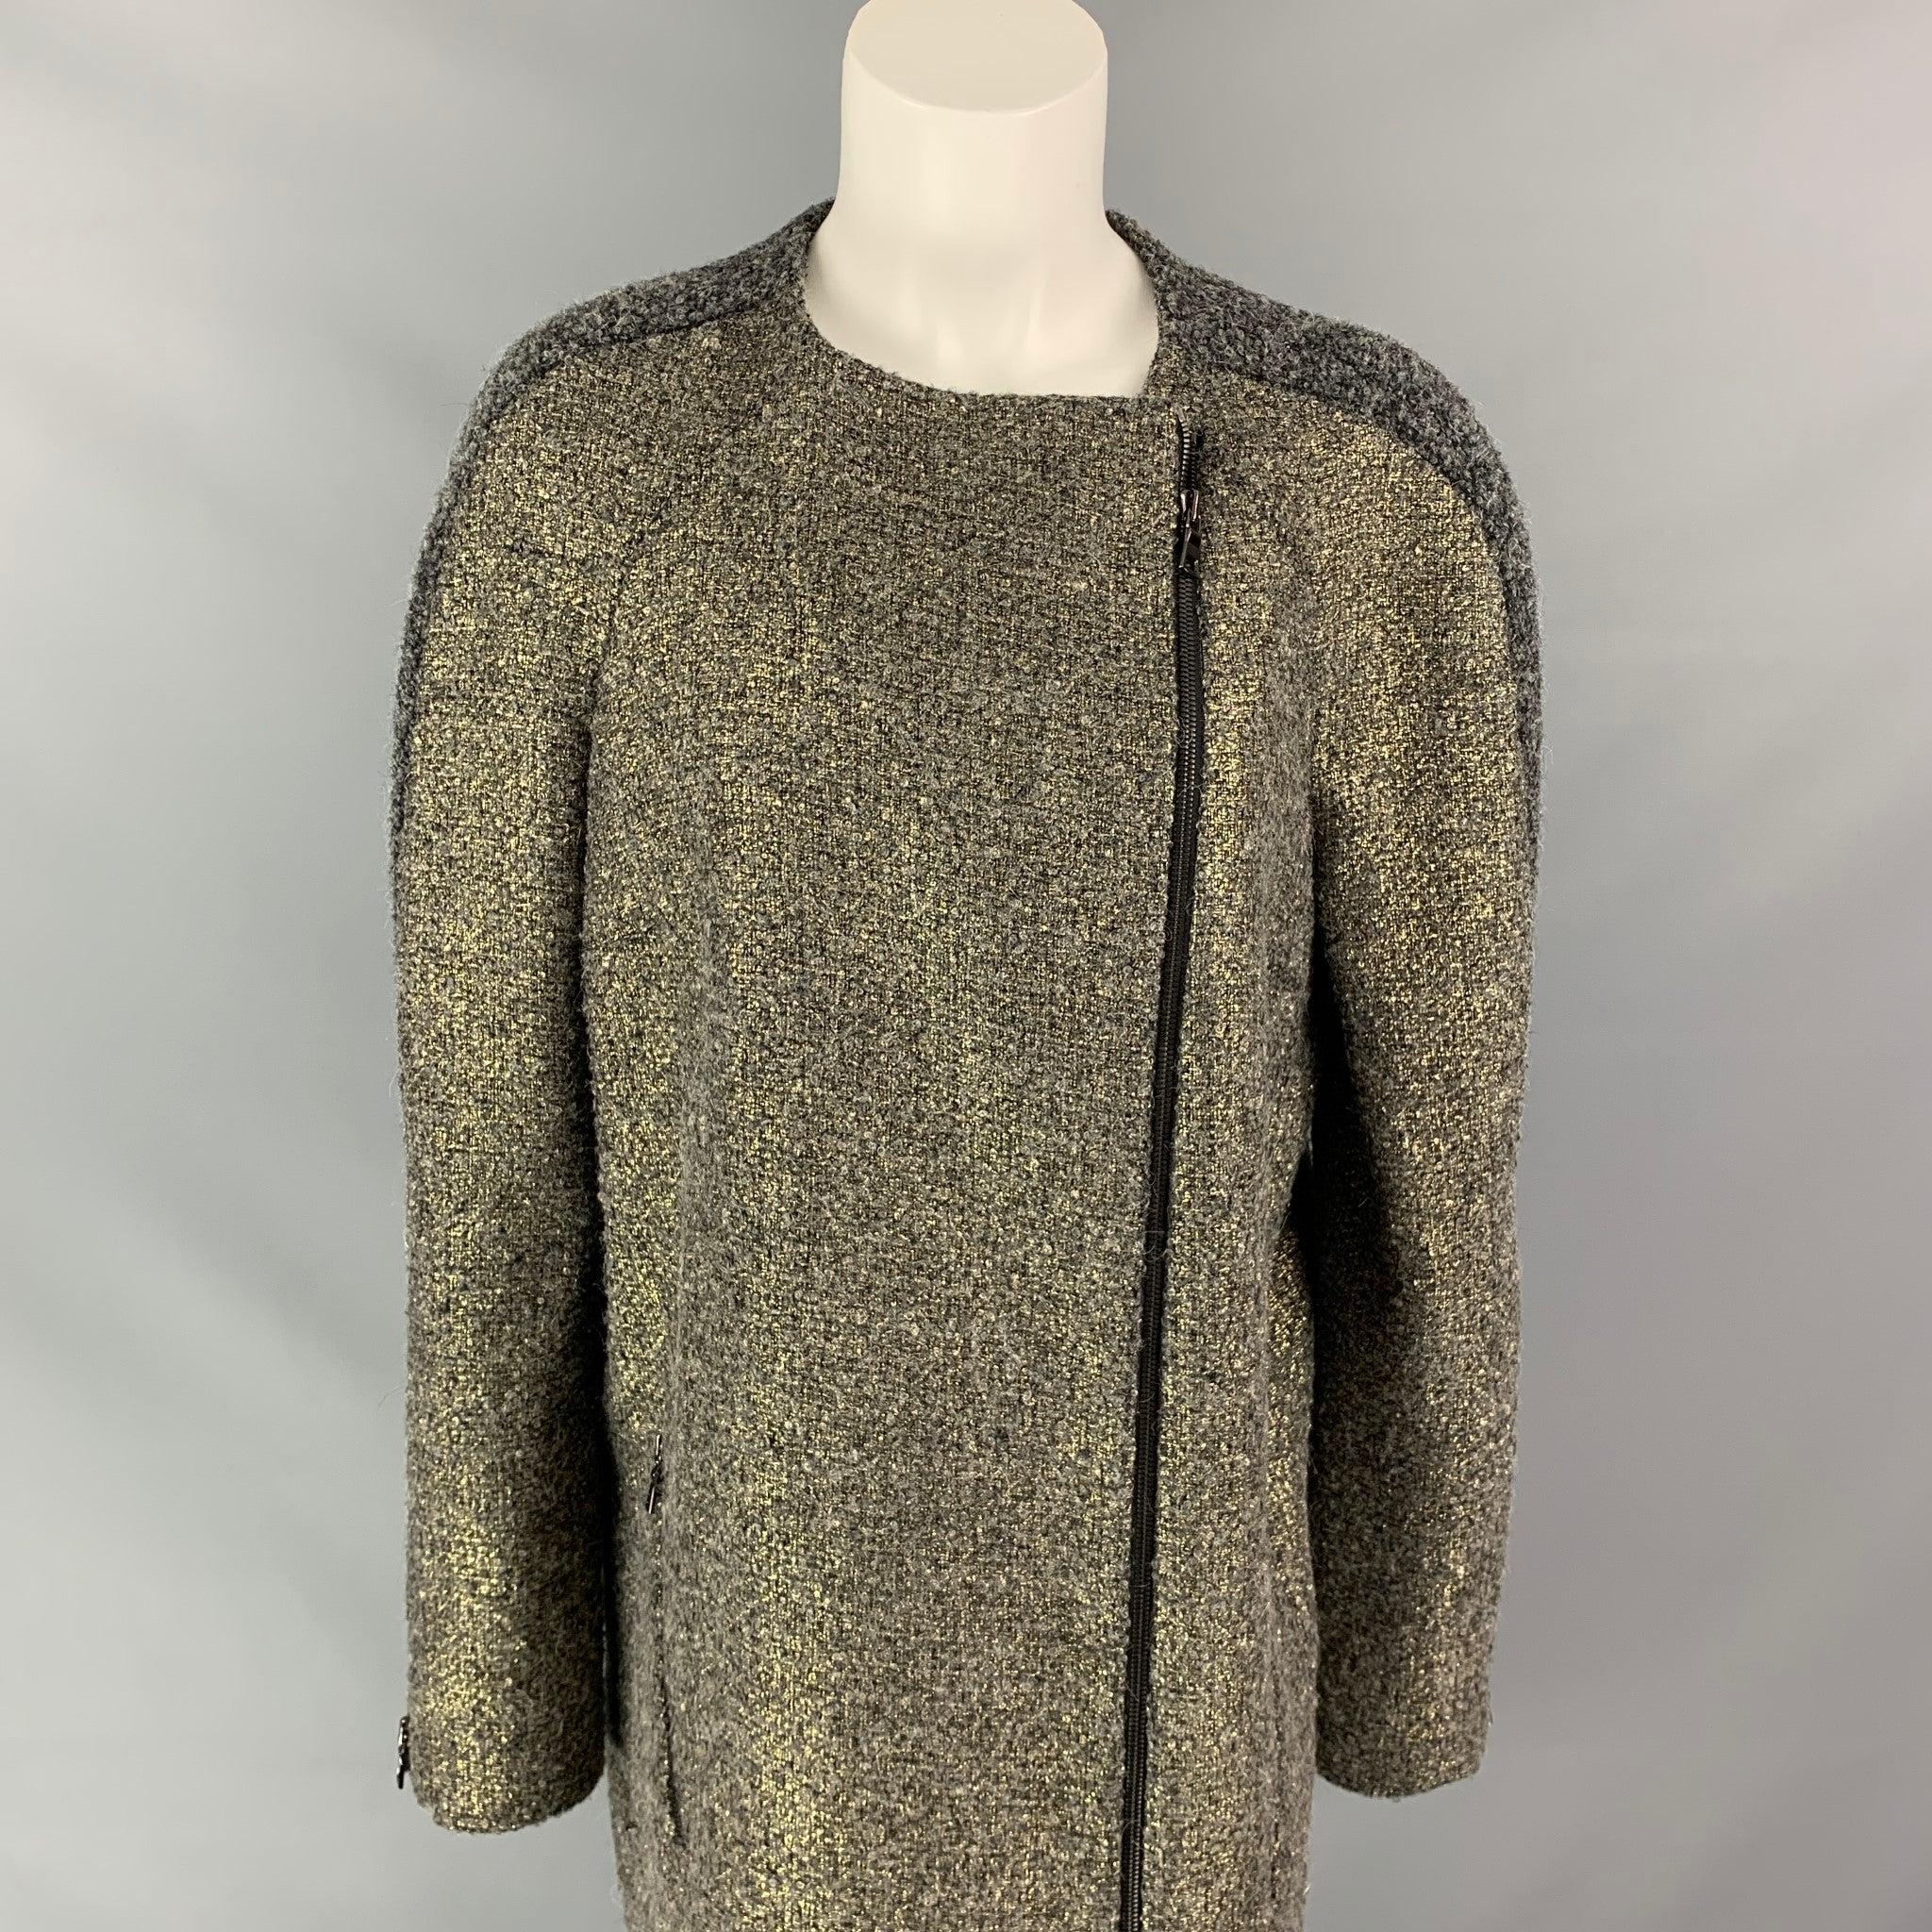 MONIQUE LHUILLIER coat comes in a grey & gold acrylic blend with a full liner featuring a collarless style, zipper pockets, and a full zip up closure. Made in USA.
Very Good
Pre-Owned Condition. 

Marked:  10 

Measurements: 
 
Shoulder: 17 inches